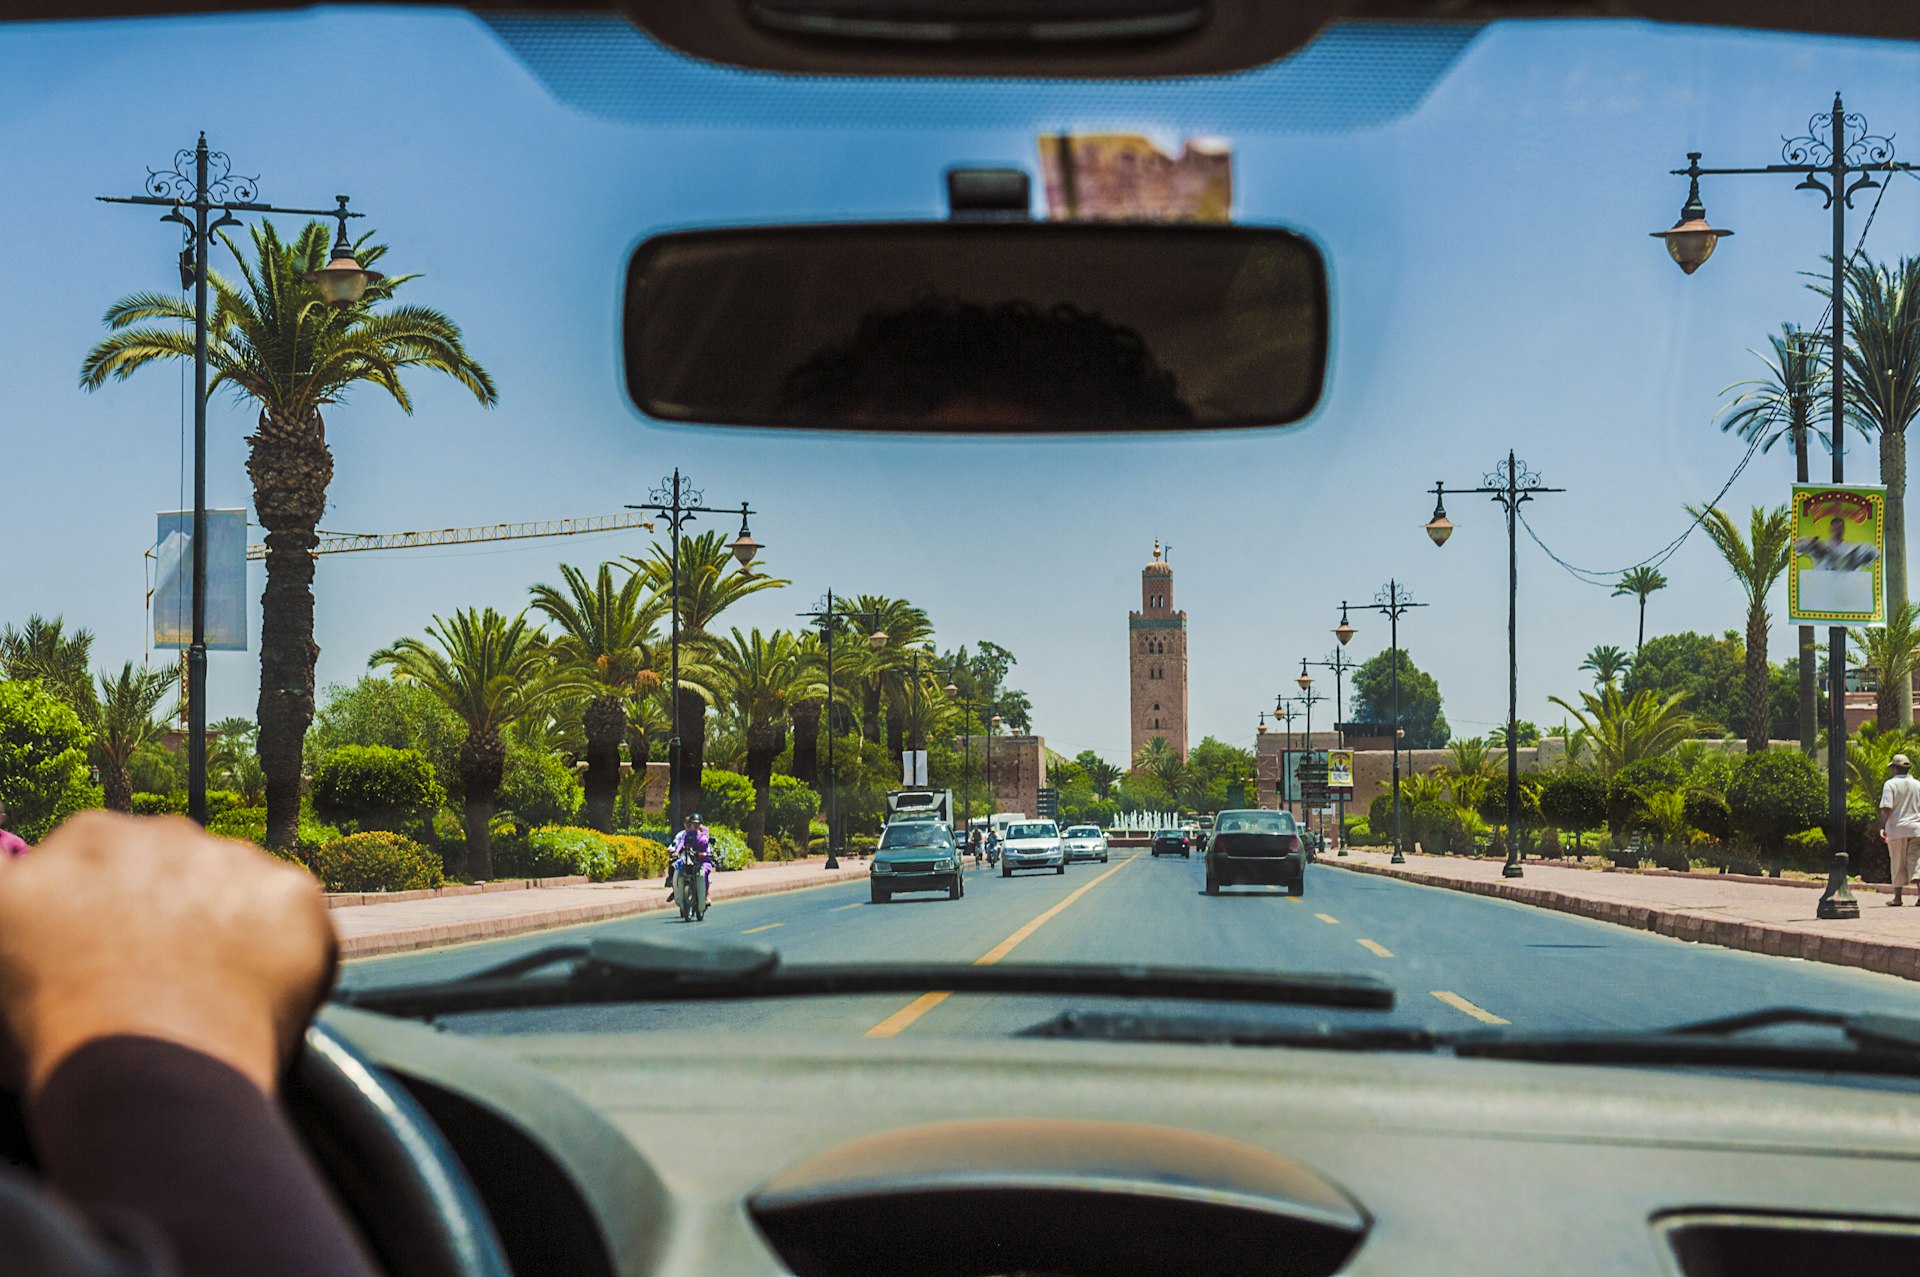 View of Koutoubia Mosque minaret from a car in Marrakesh